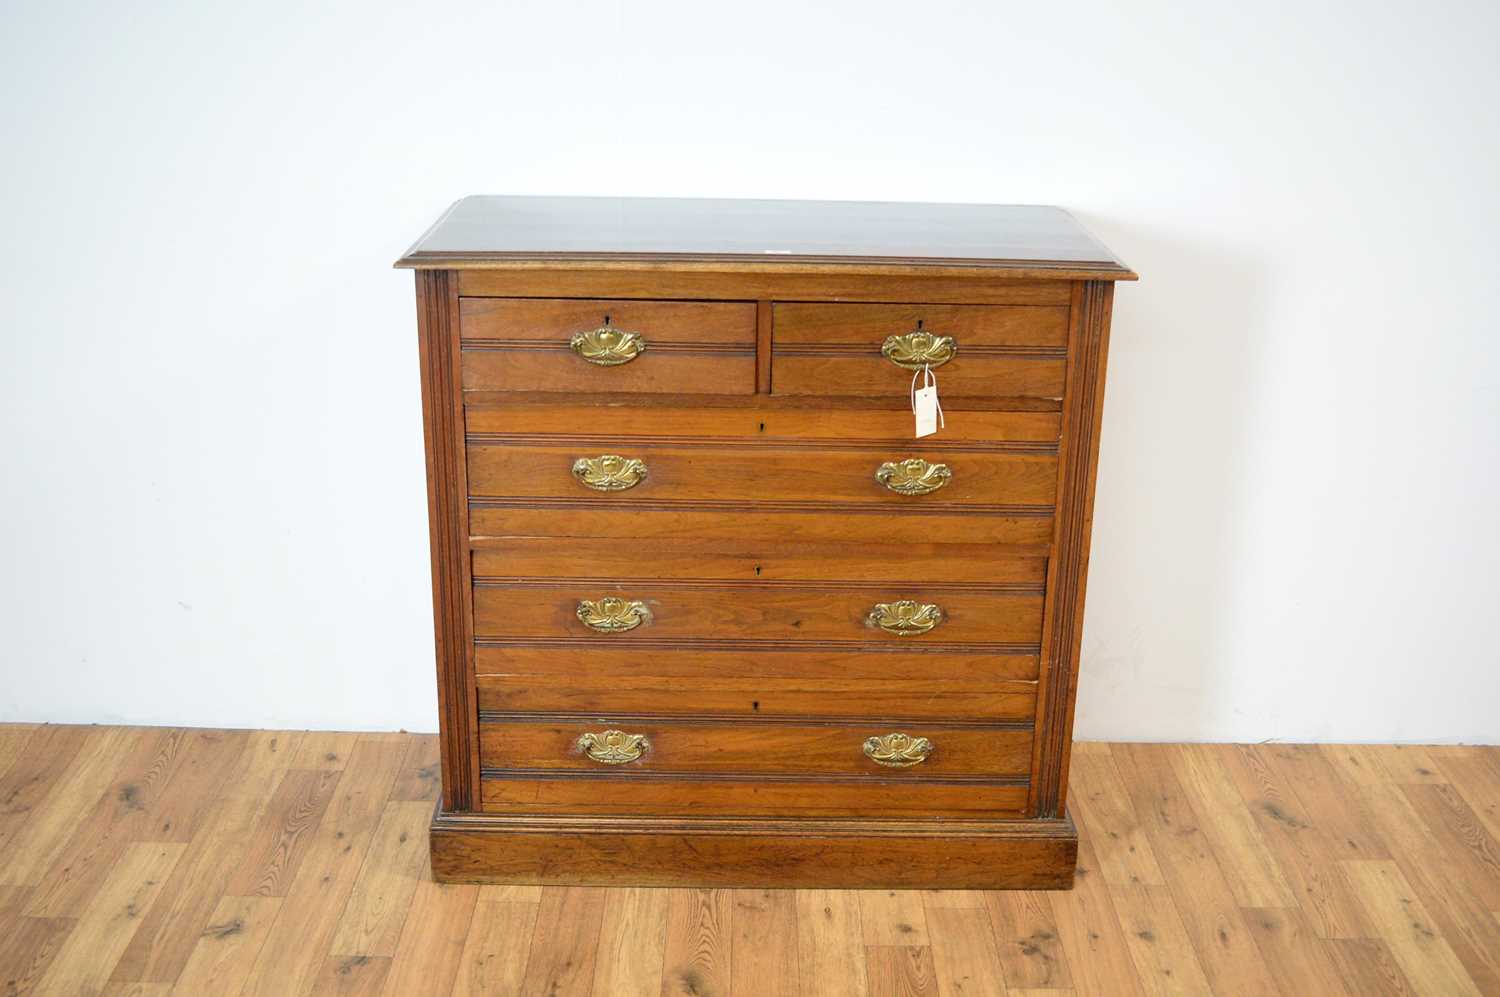 An Edwardian walnut chest of drawers - Image 2 of 4